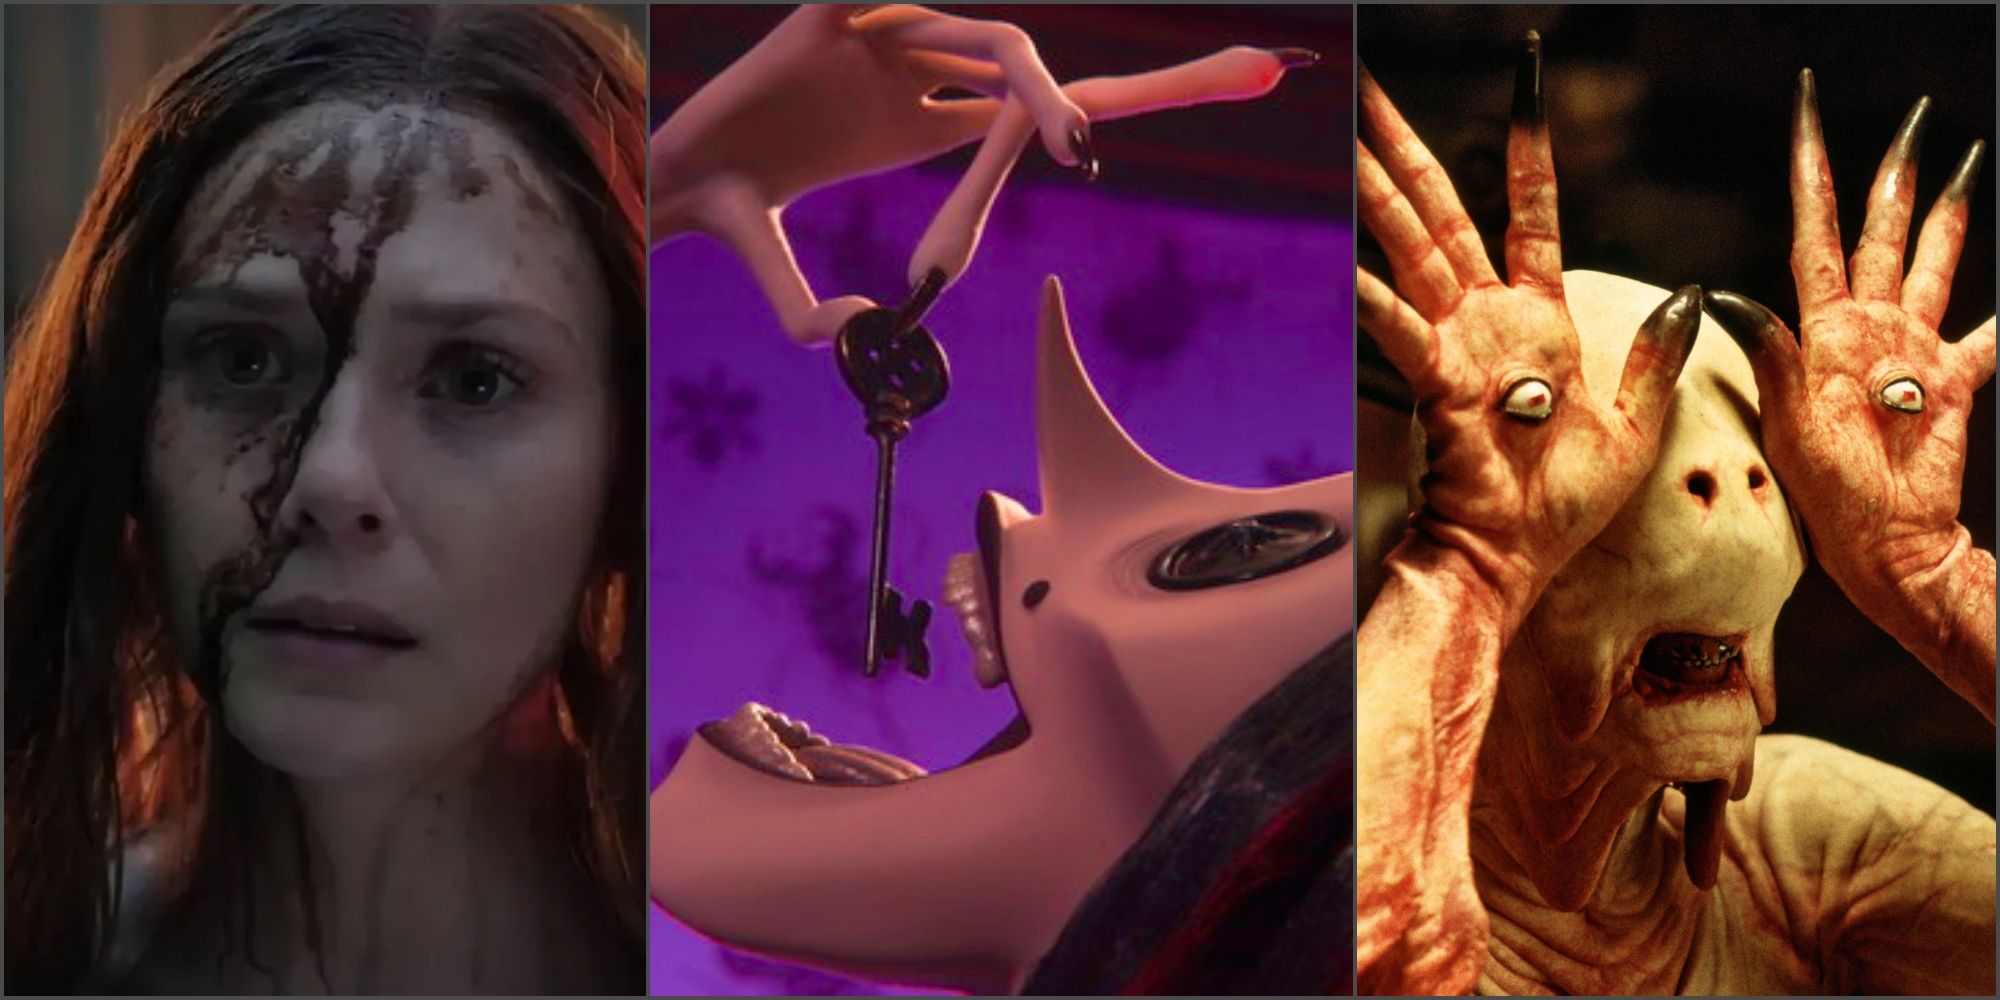 Wanda Maximoff in Doctor Strange In The Multiverse Of Madness, The Other Mother in Coraline, and The Pale Man in Pan's Labyrinth